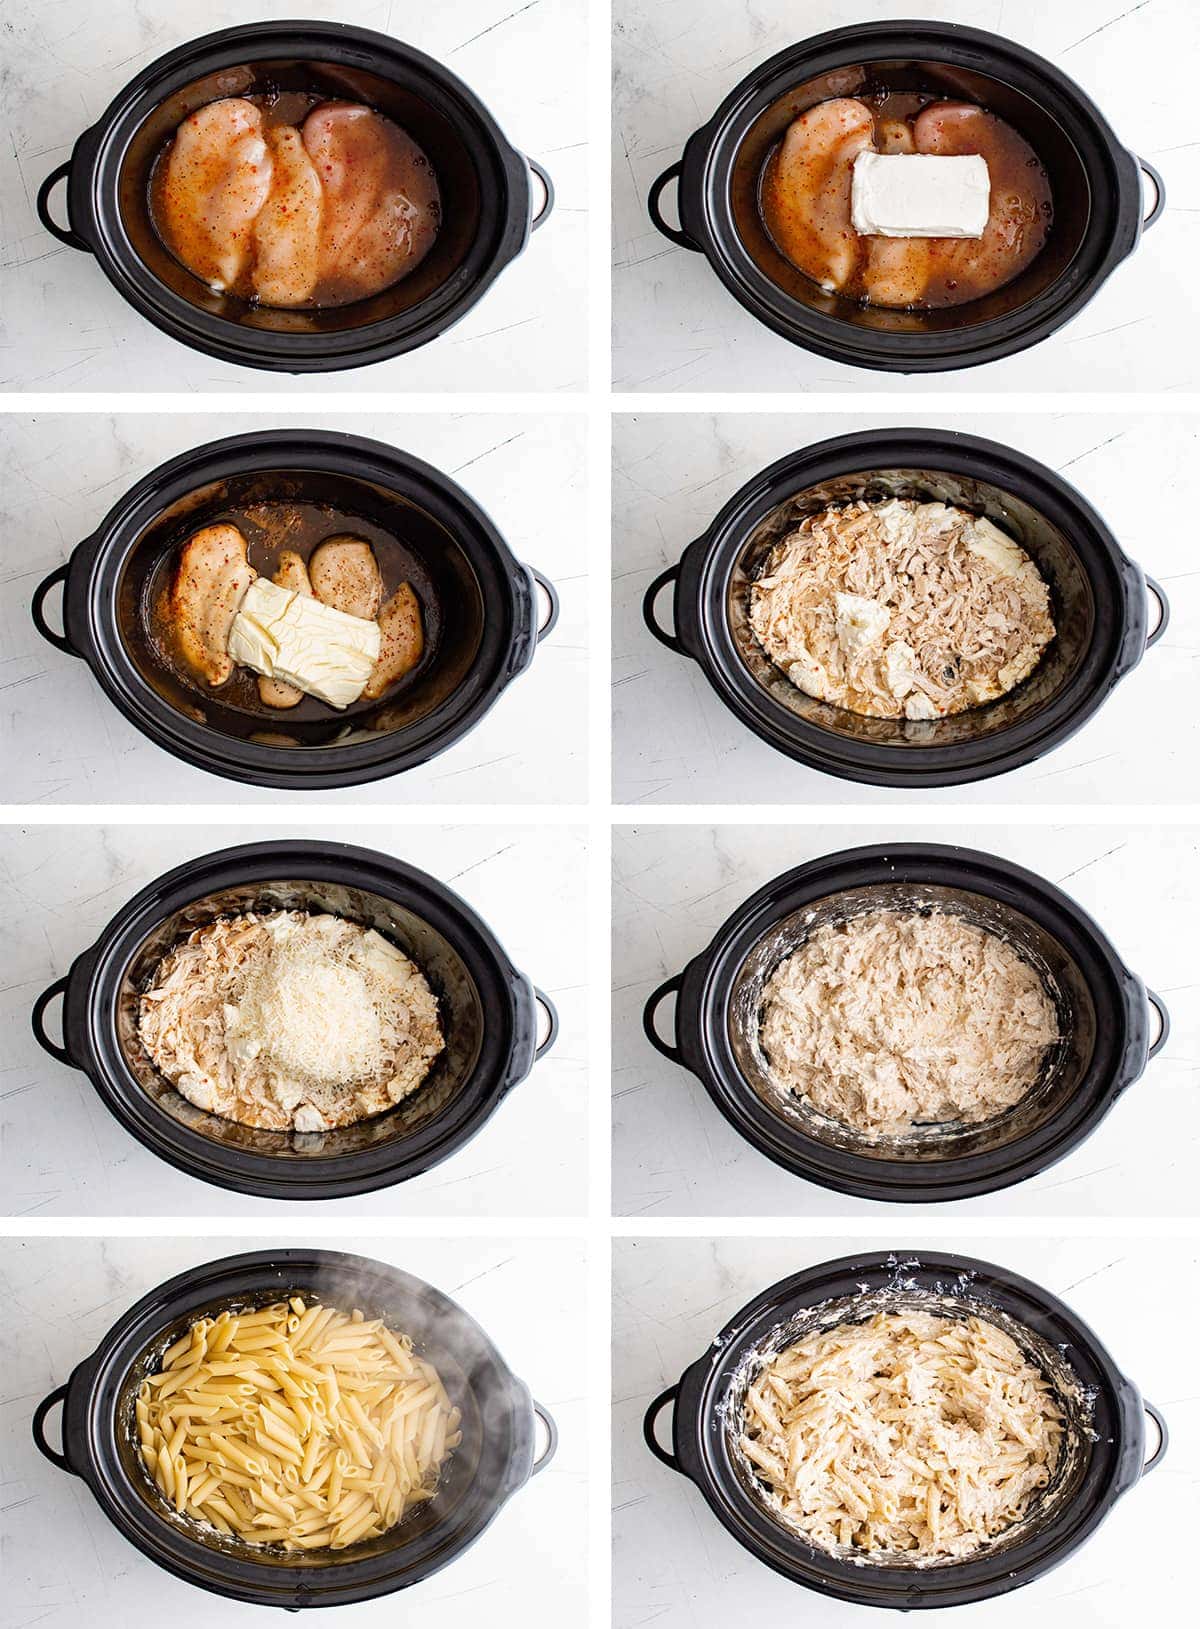 Collage of images showing how to make creamy crockpot chicken.